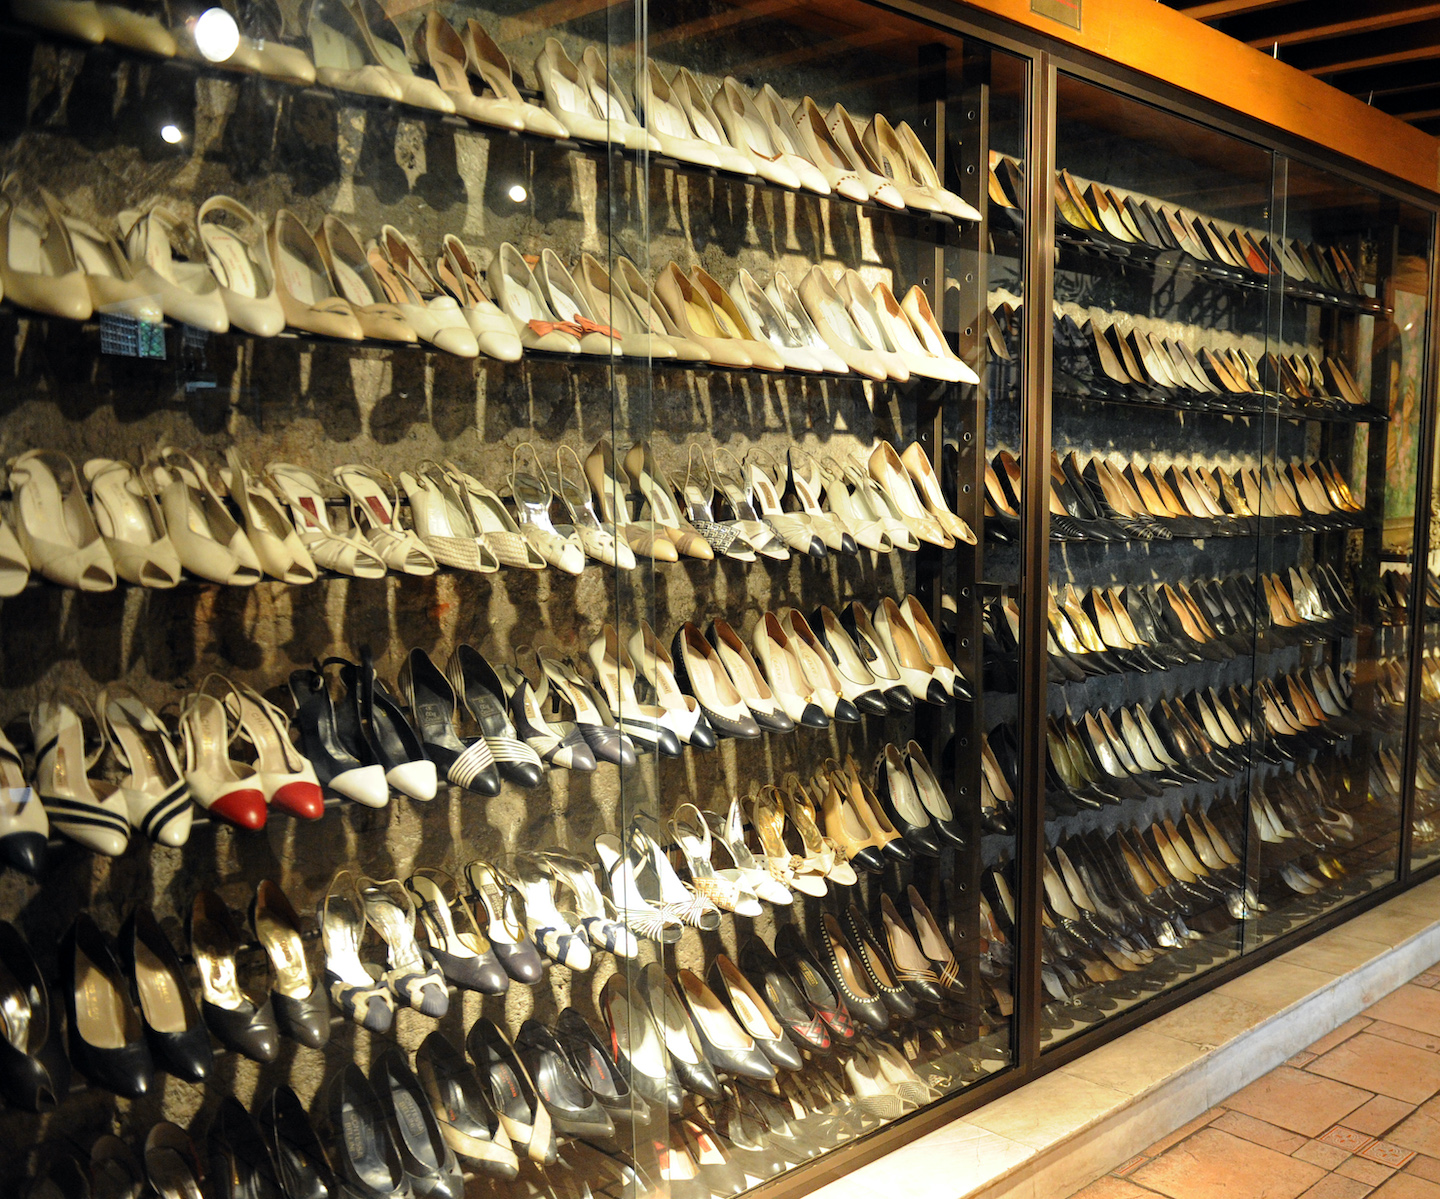 What Ever Happened to Imelda Marcos' 3,000 Pairs of Shoes?